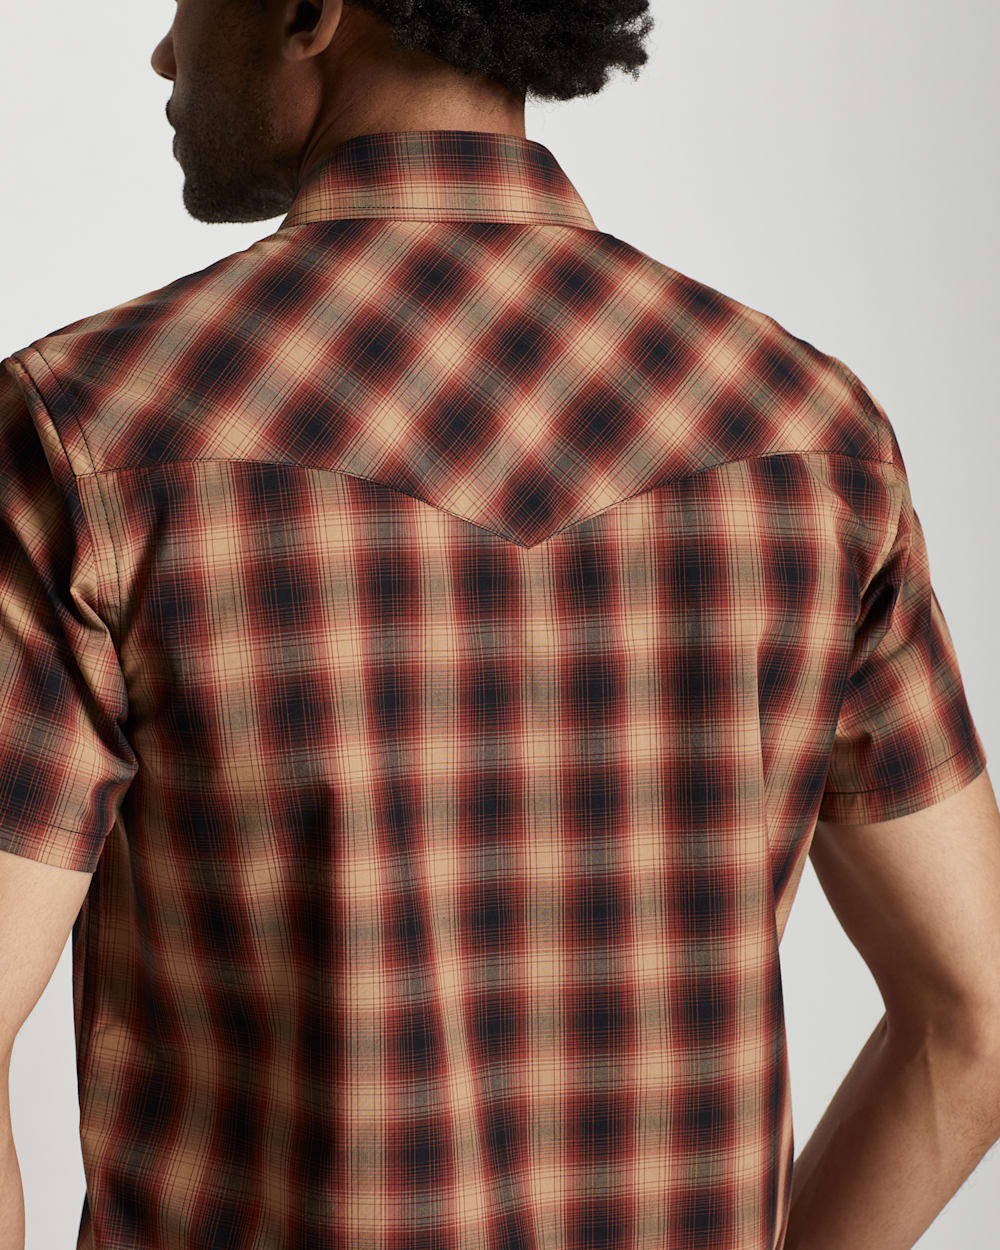 ALTERNATE VIEW OF MEN'S SHORT-SLEEVE FRONTIER SHIRT IN RED/TAN/BLACK OMBRE image number 5